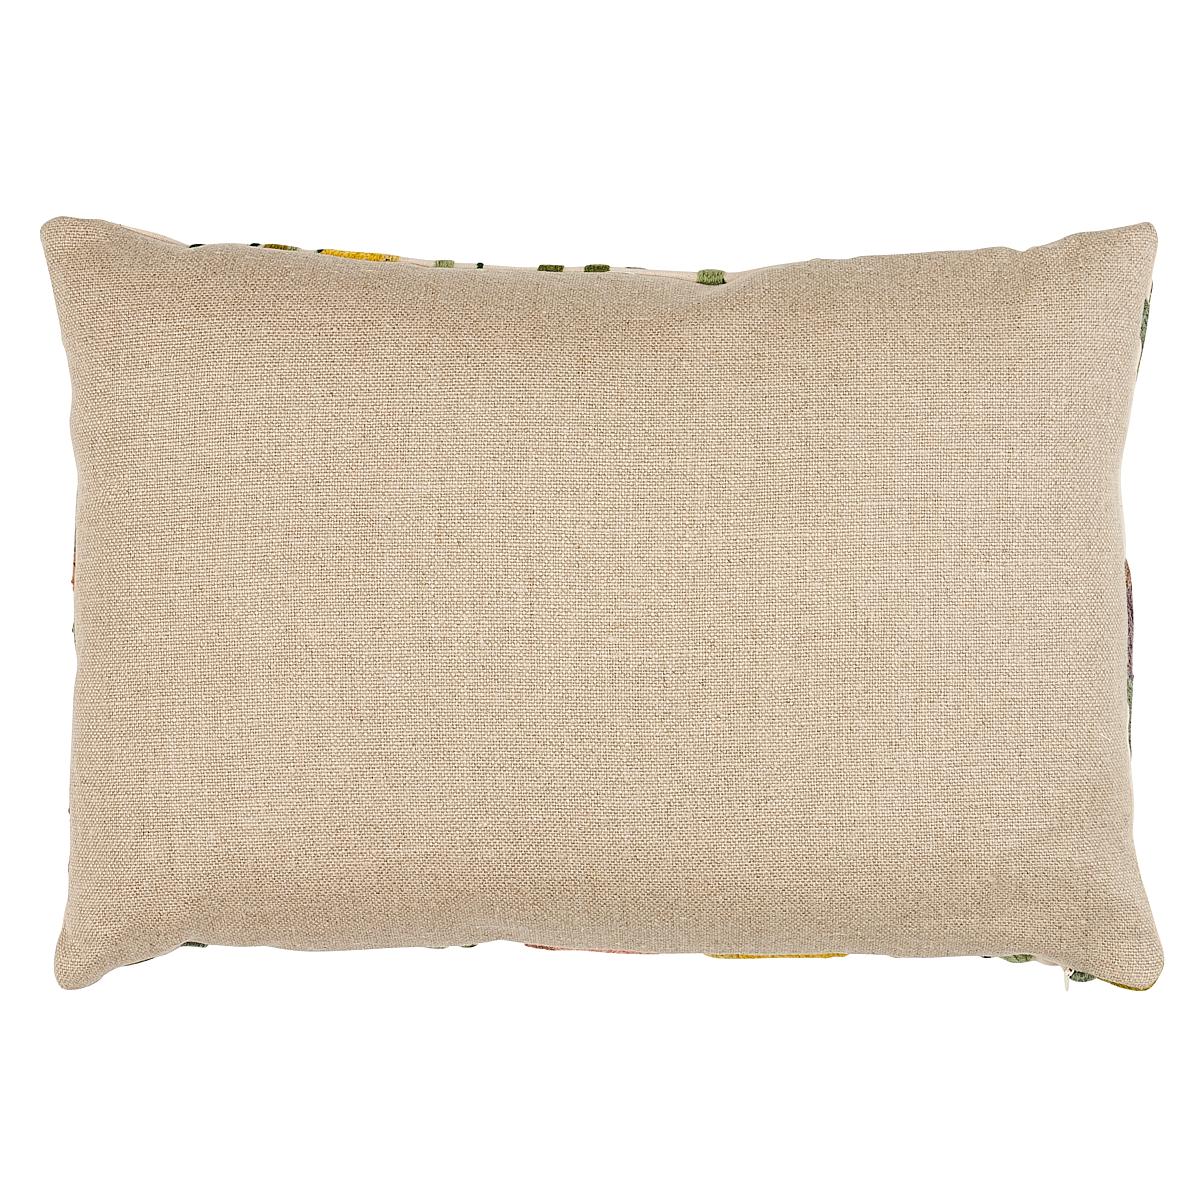 This pillow features Deco Flower Embroidery with a knife edge finish. Deco Flower Embroidery in multi is a lovely loose floral design inspired by a hand-embroidered documentary fabric in our archive. Body of pillow is Piet Performance Linen. Pillow